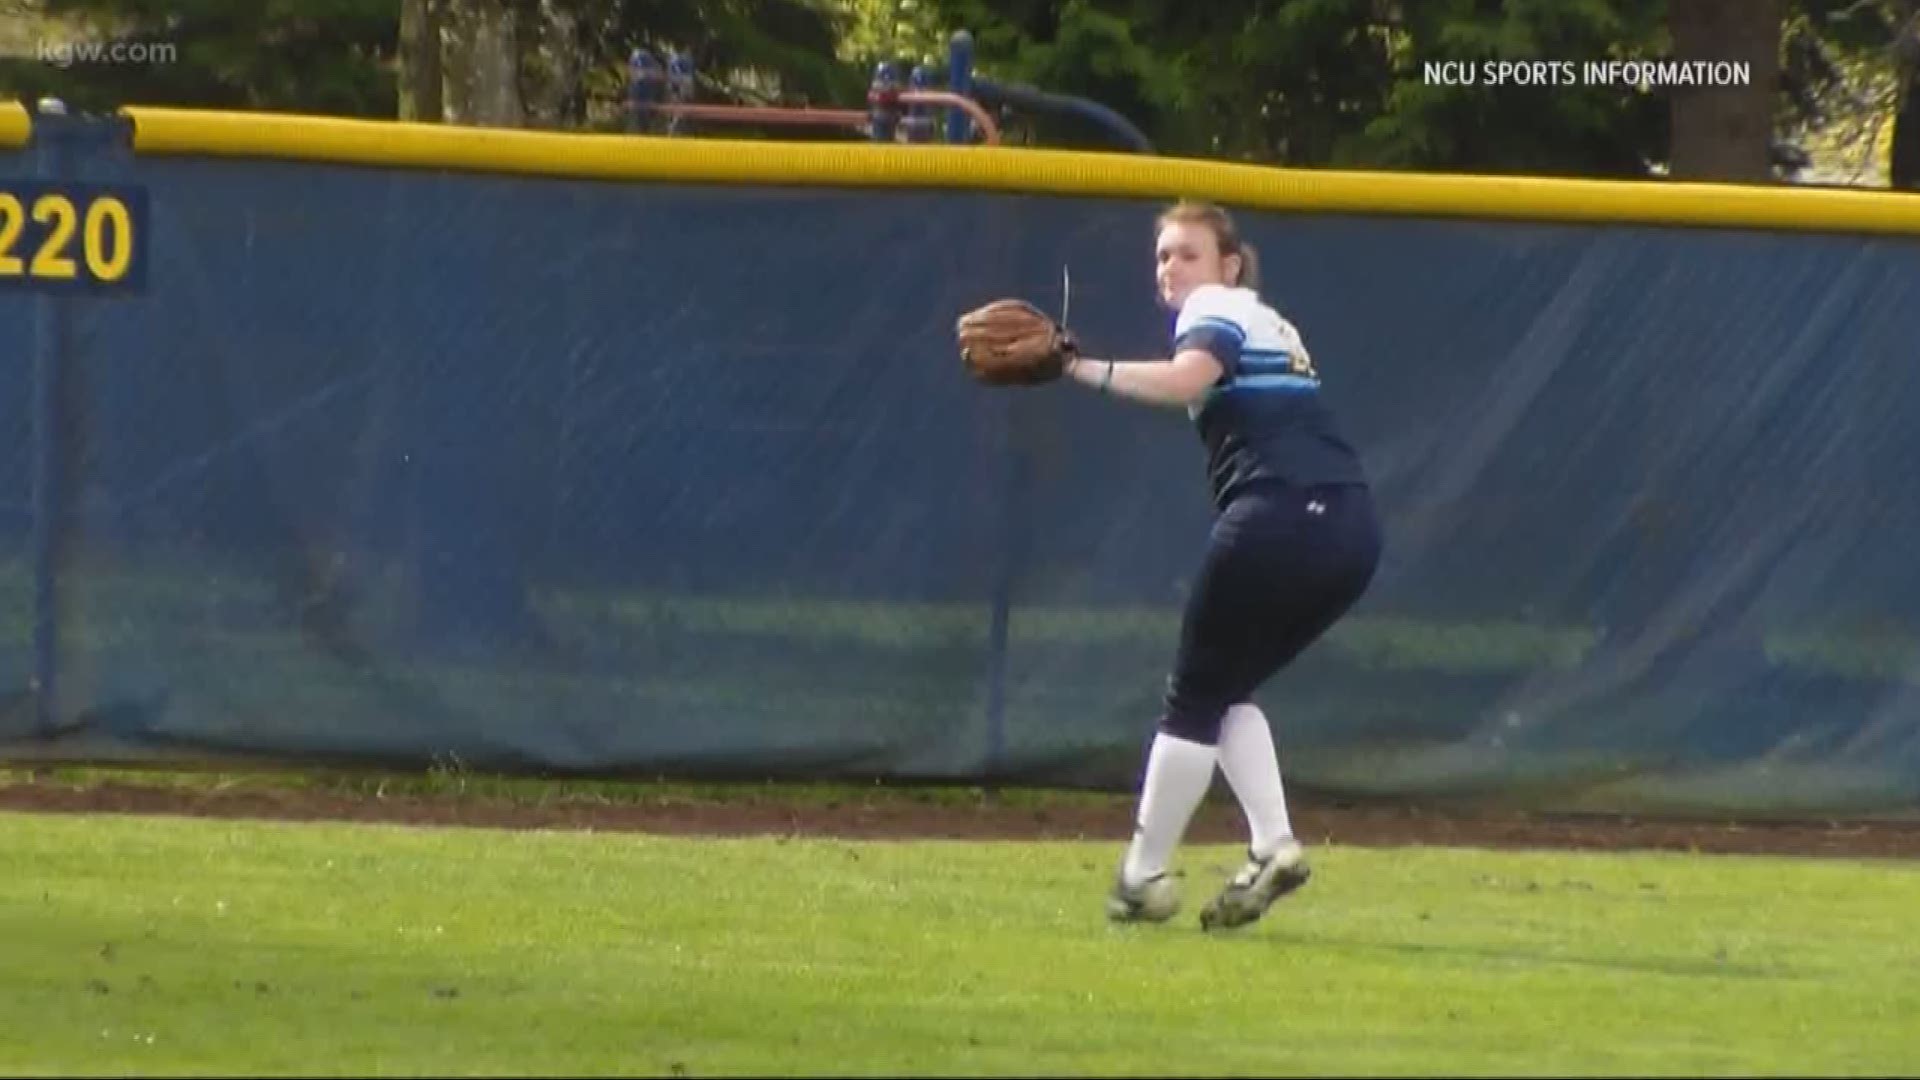 Softball player has returned to the field after battling cancer.